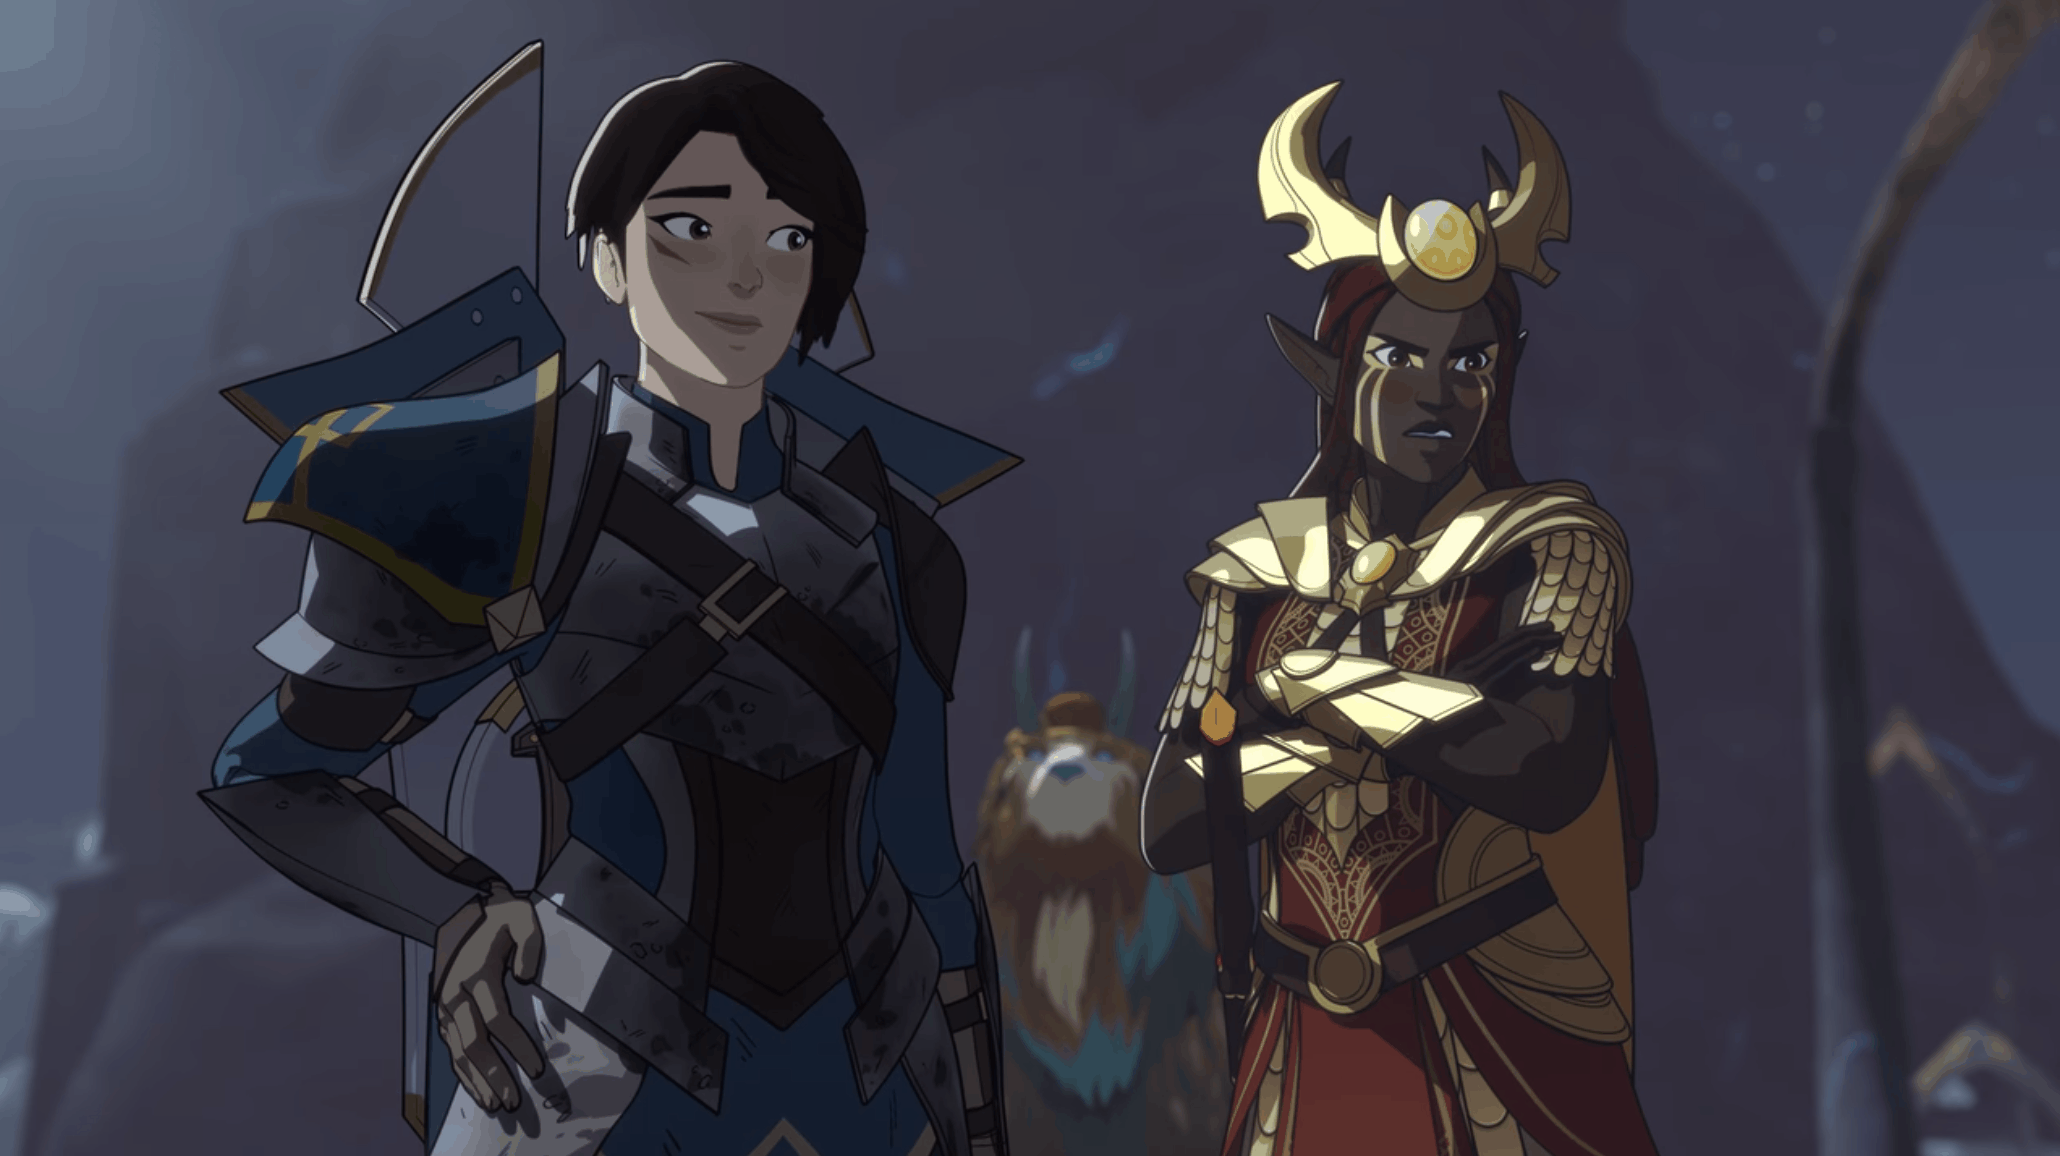 General Amaya and Sunfire elf Janai stand together in the dragon queen's lair.